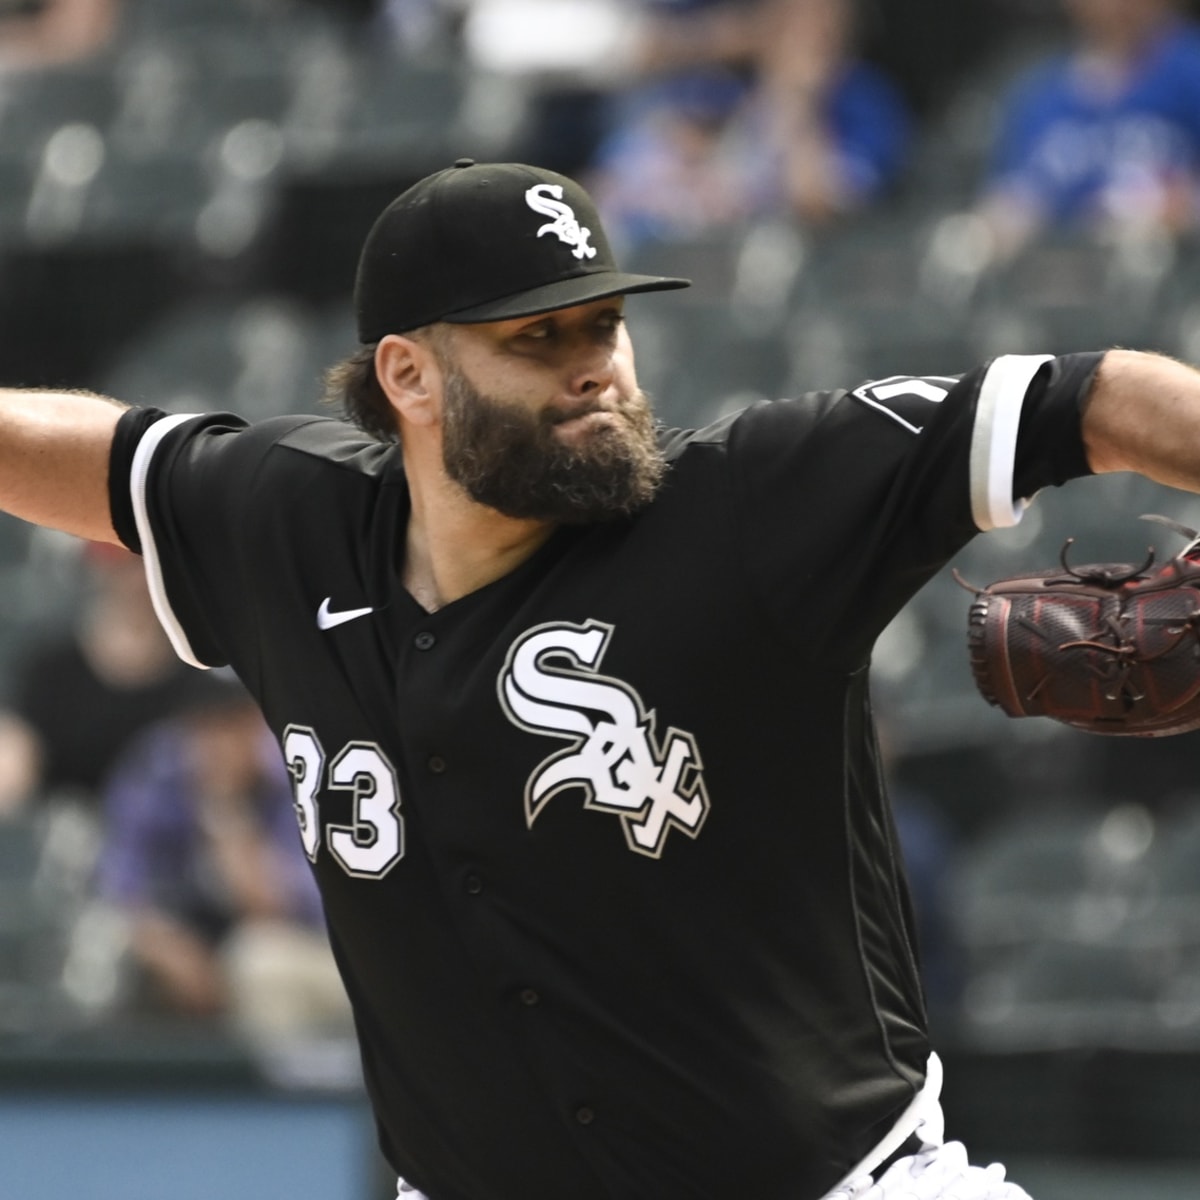 MLB Insider Suggests Two Key White Sox Players Will Be Dealt, Says